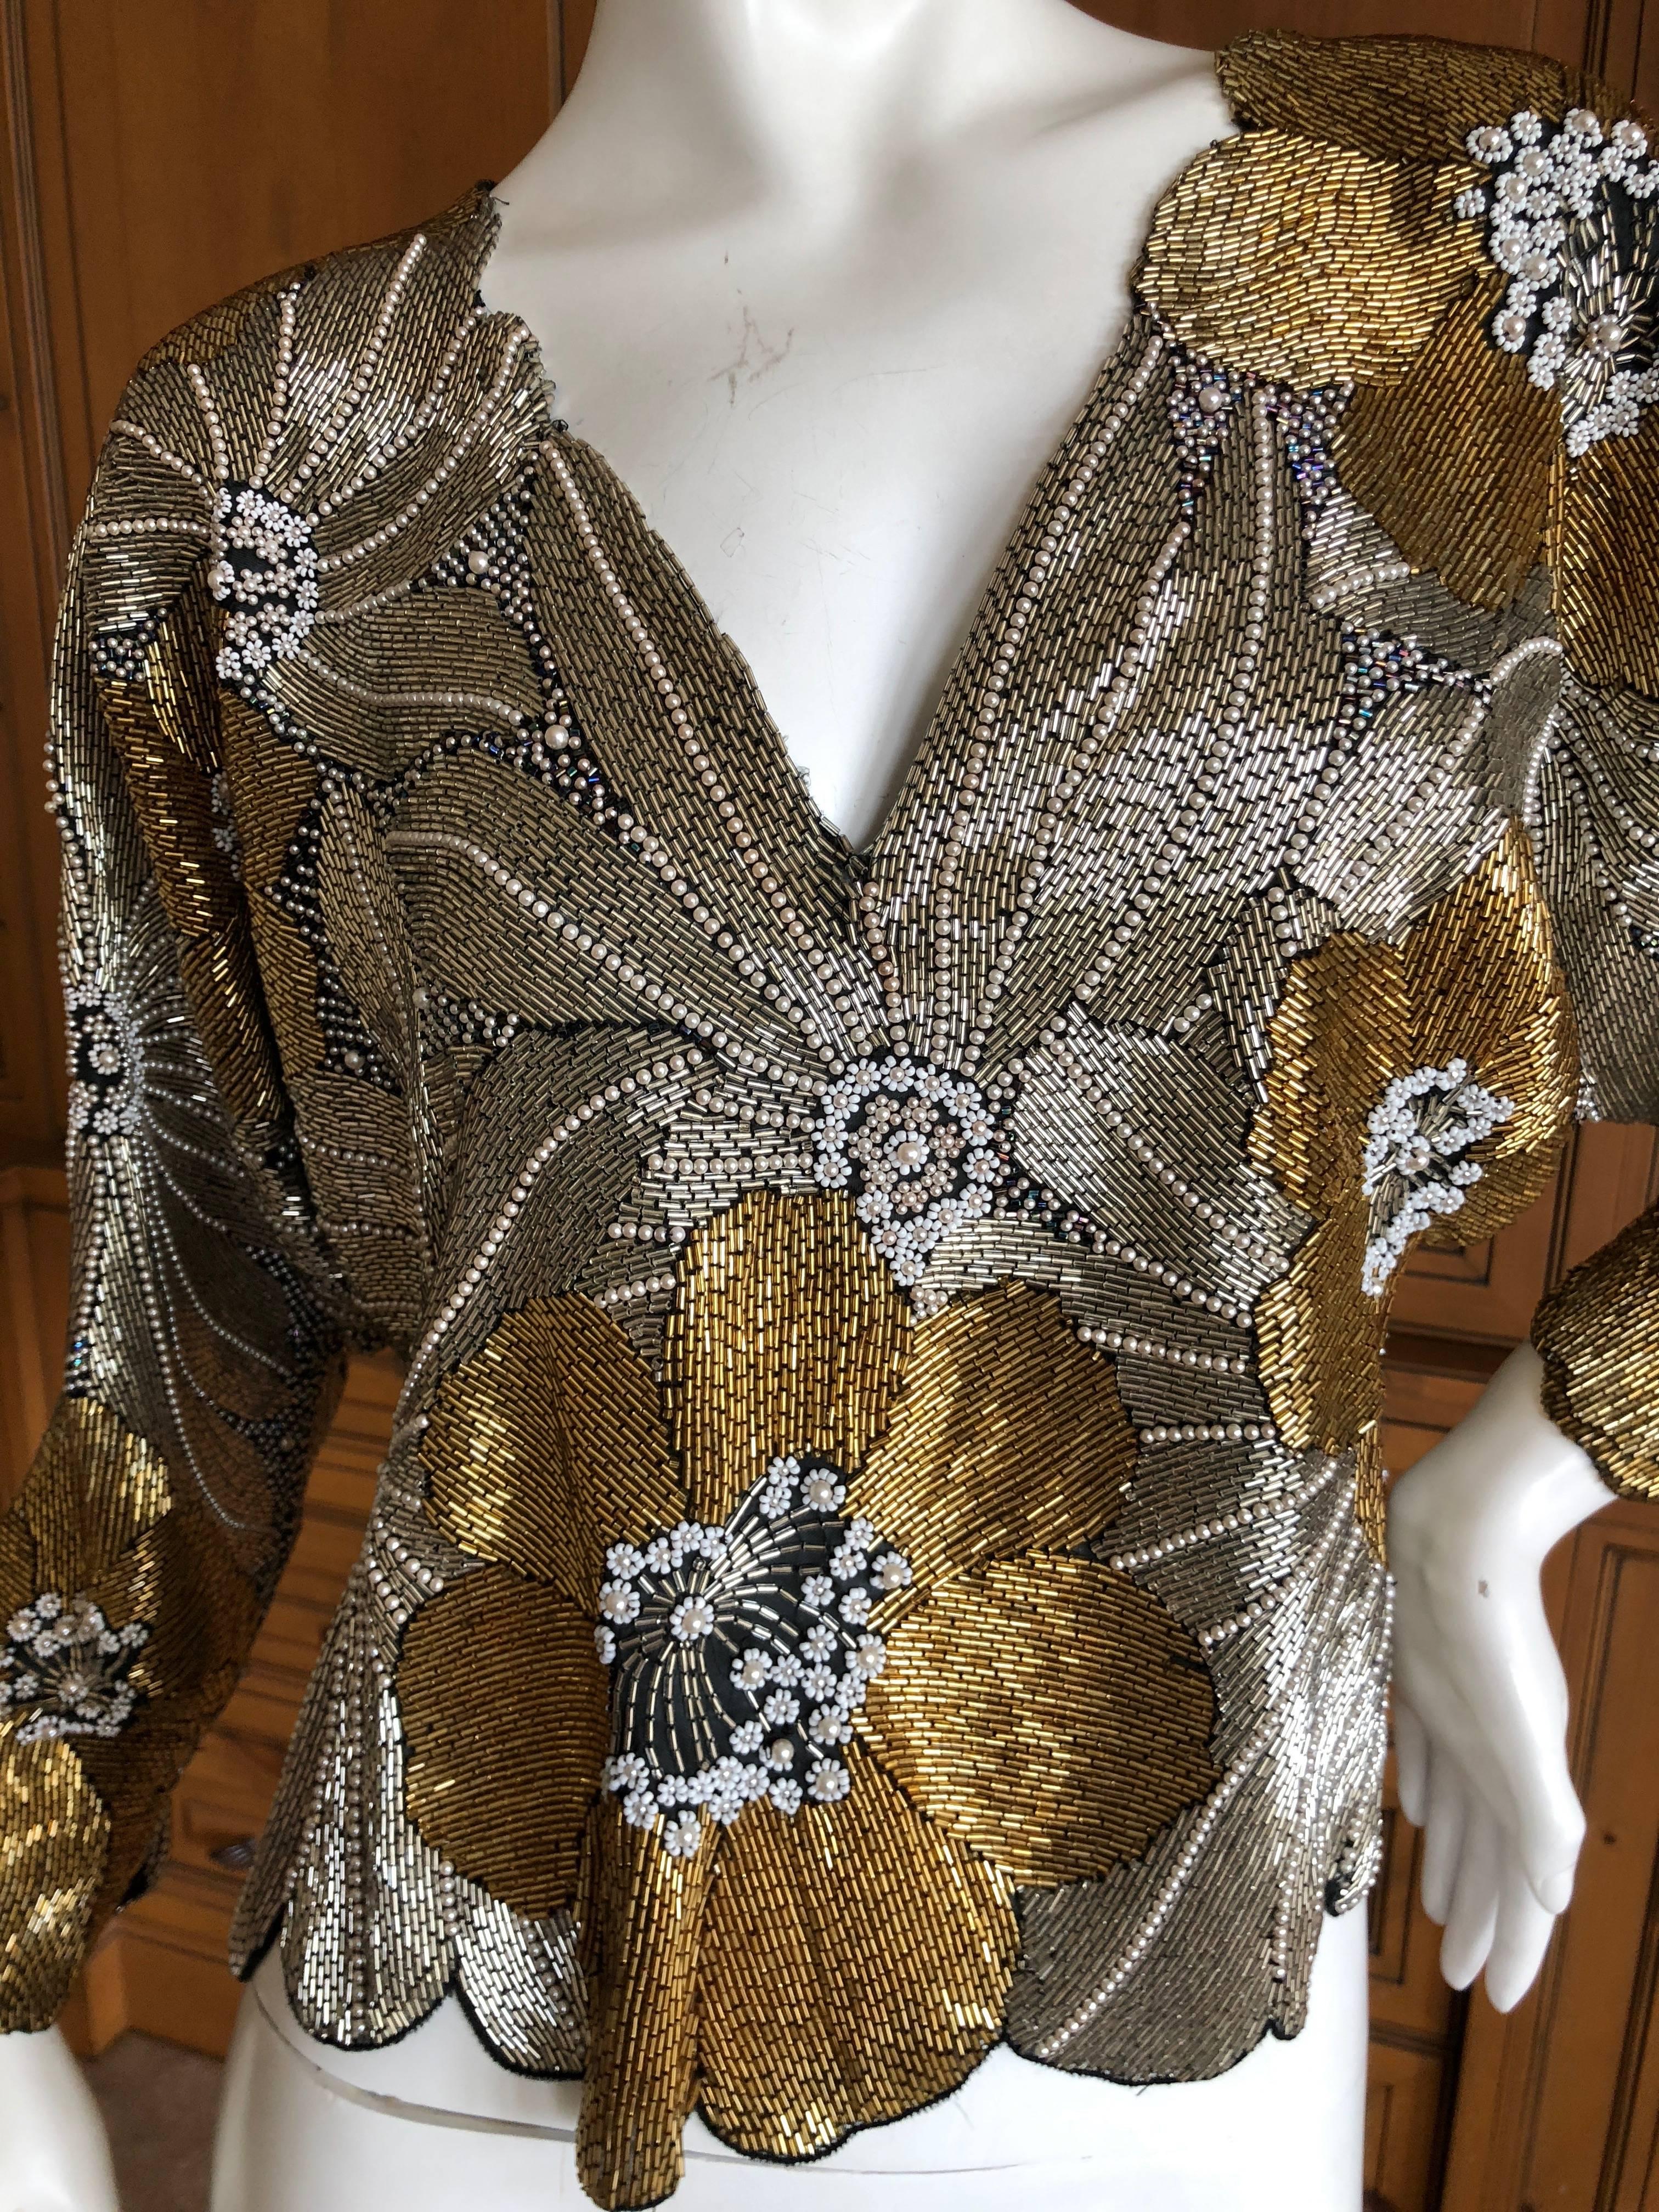 Women's Halston 1970's Disco Era Gold Bugle Bead and Pearl Embellished Top For Sale